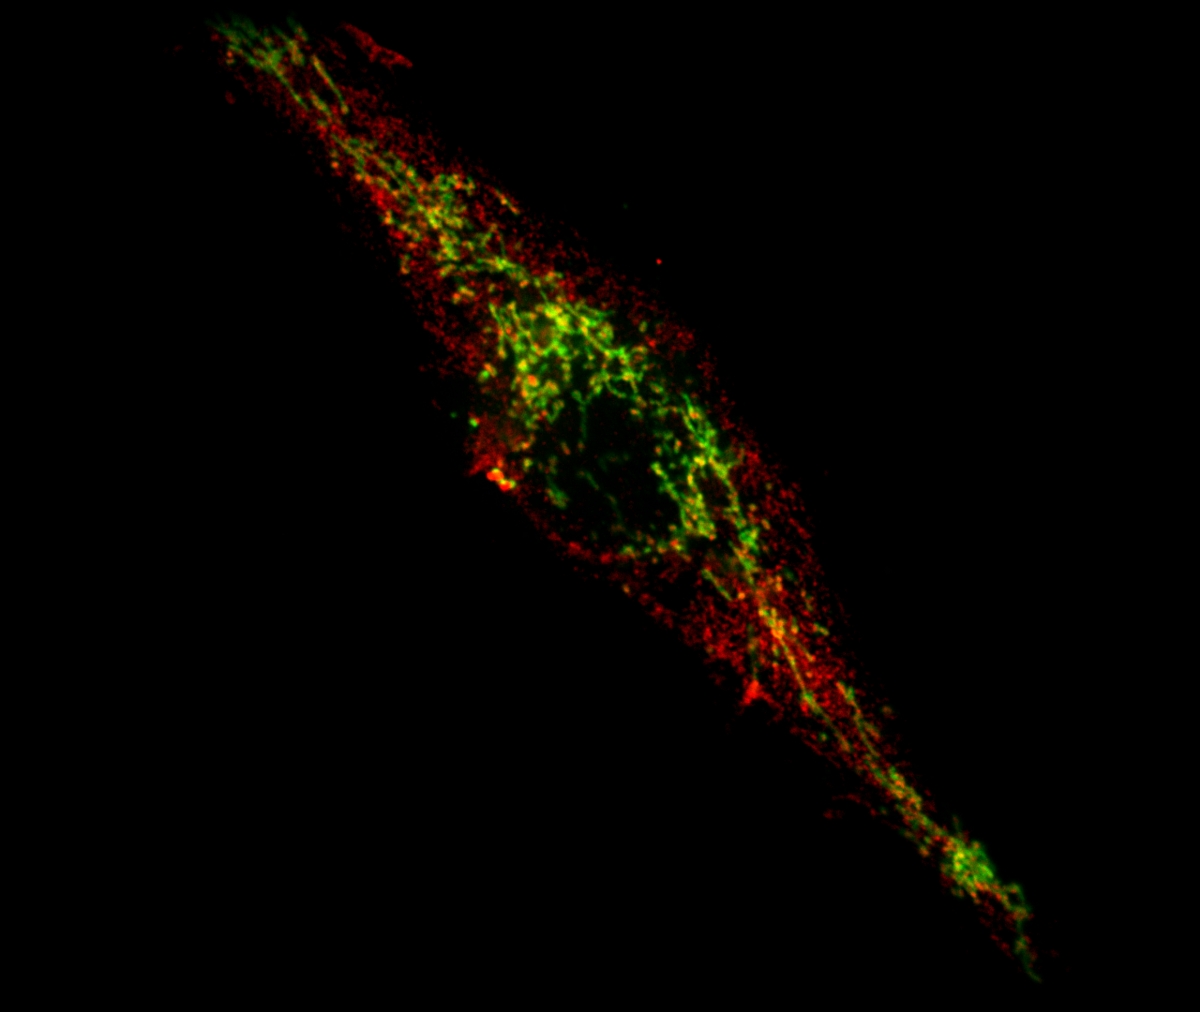 A cell where the Parkinson's disease-related protein PINK1 is absent is in the process of presenting mitochondrial antigens (in red) at its surface to alert the immune system. Intact mitochondria are observed as rod-like structures in green.